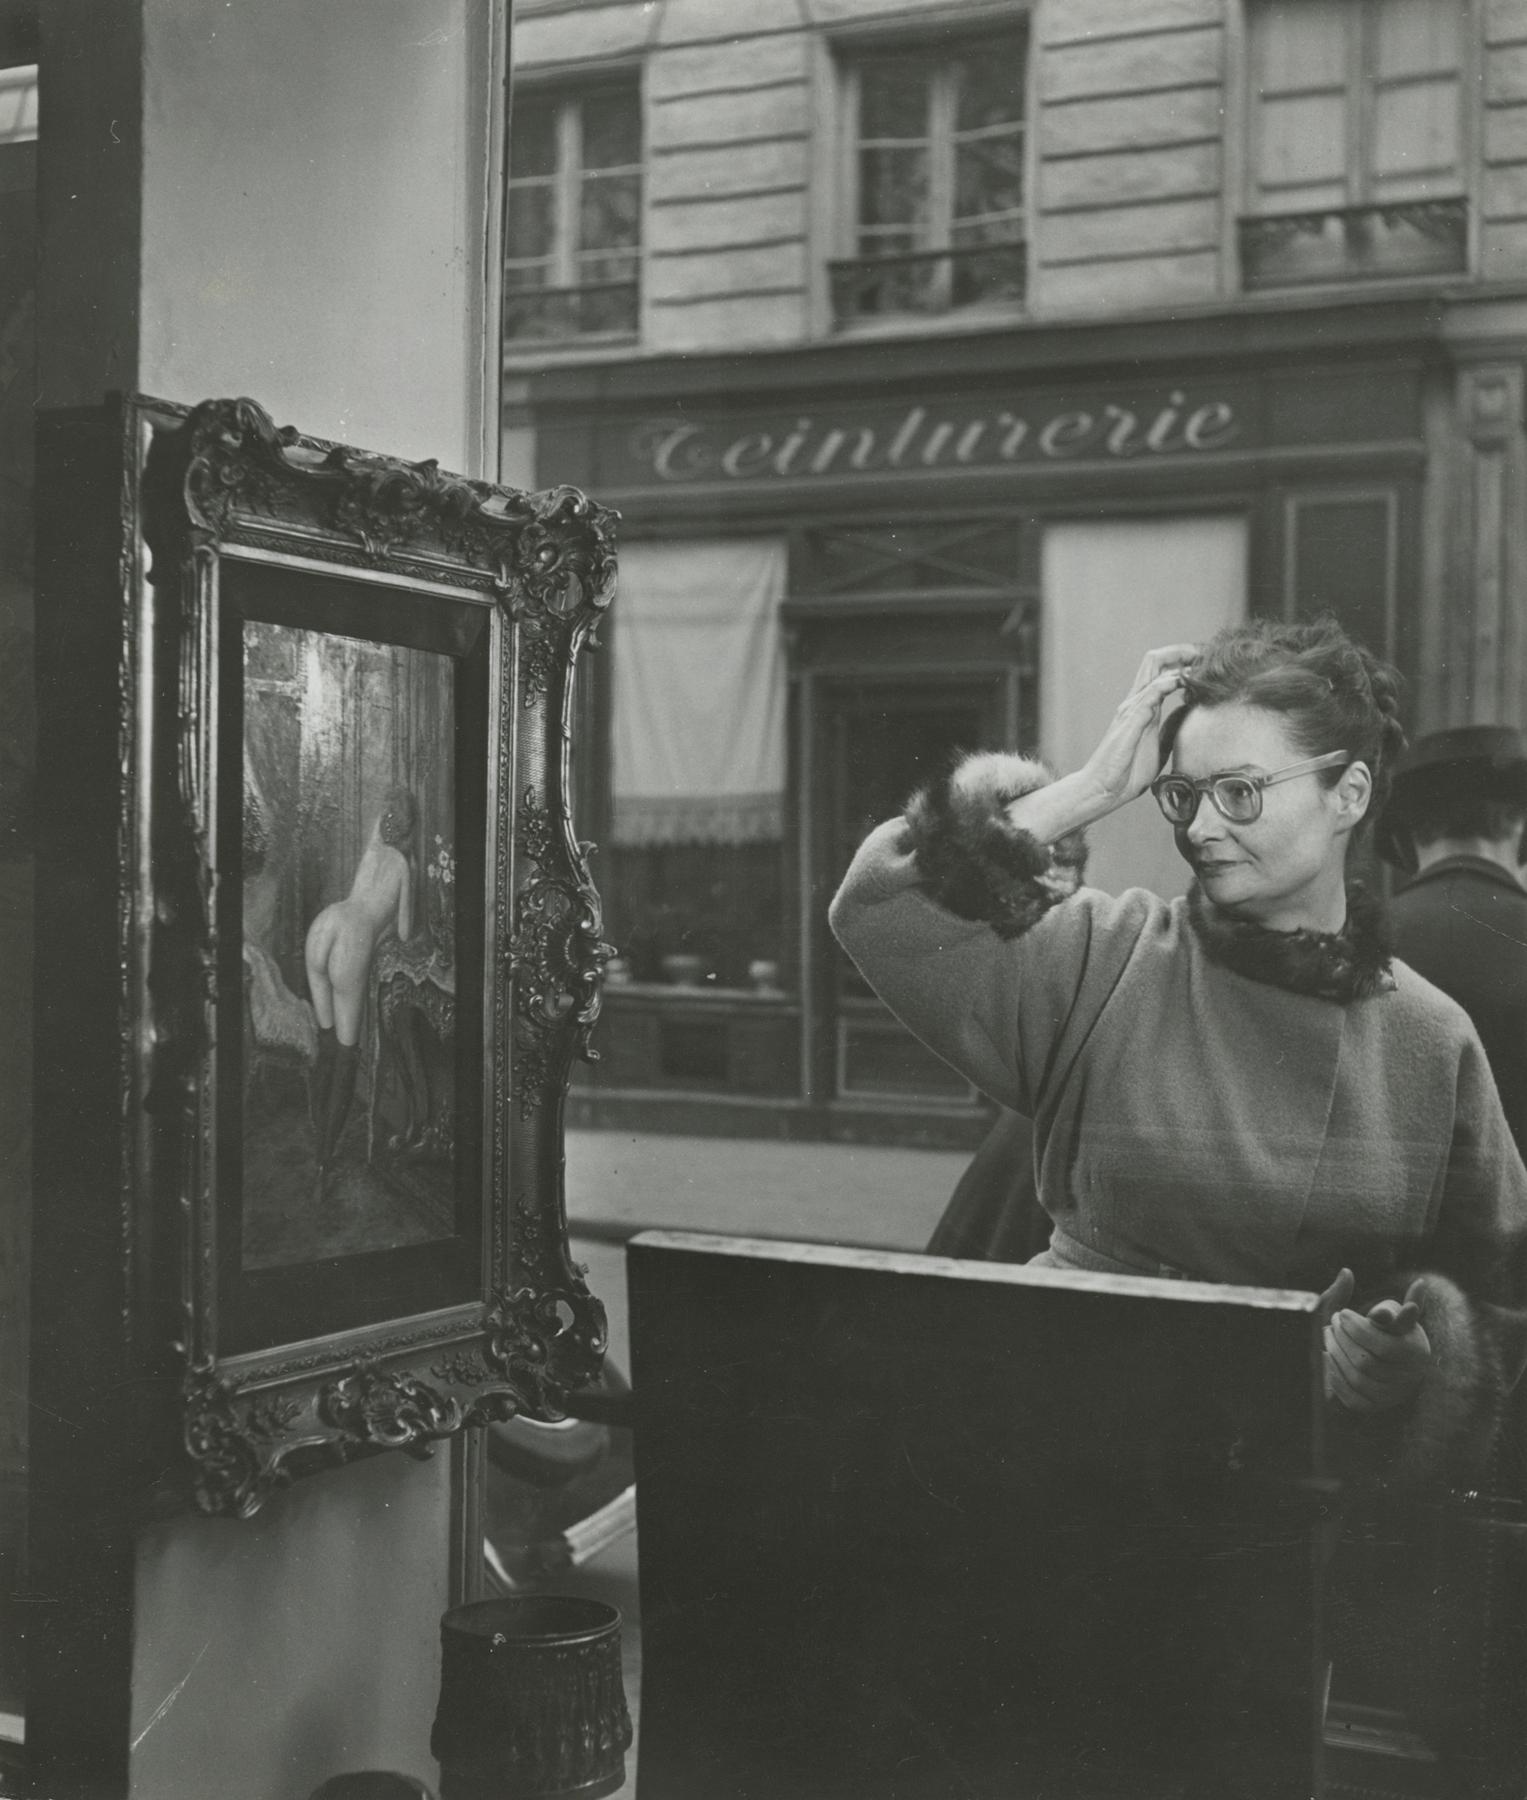 Robert Doisneau Black and White Photograph - Woman Looking at Painting of a Nude in Paris Antique Shop Window, 1948